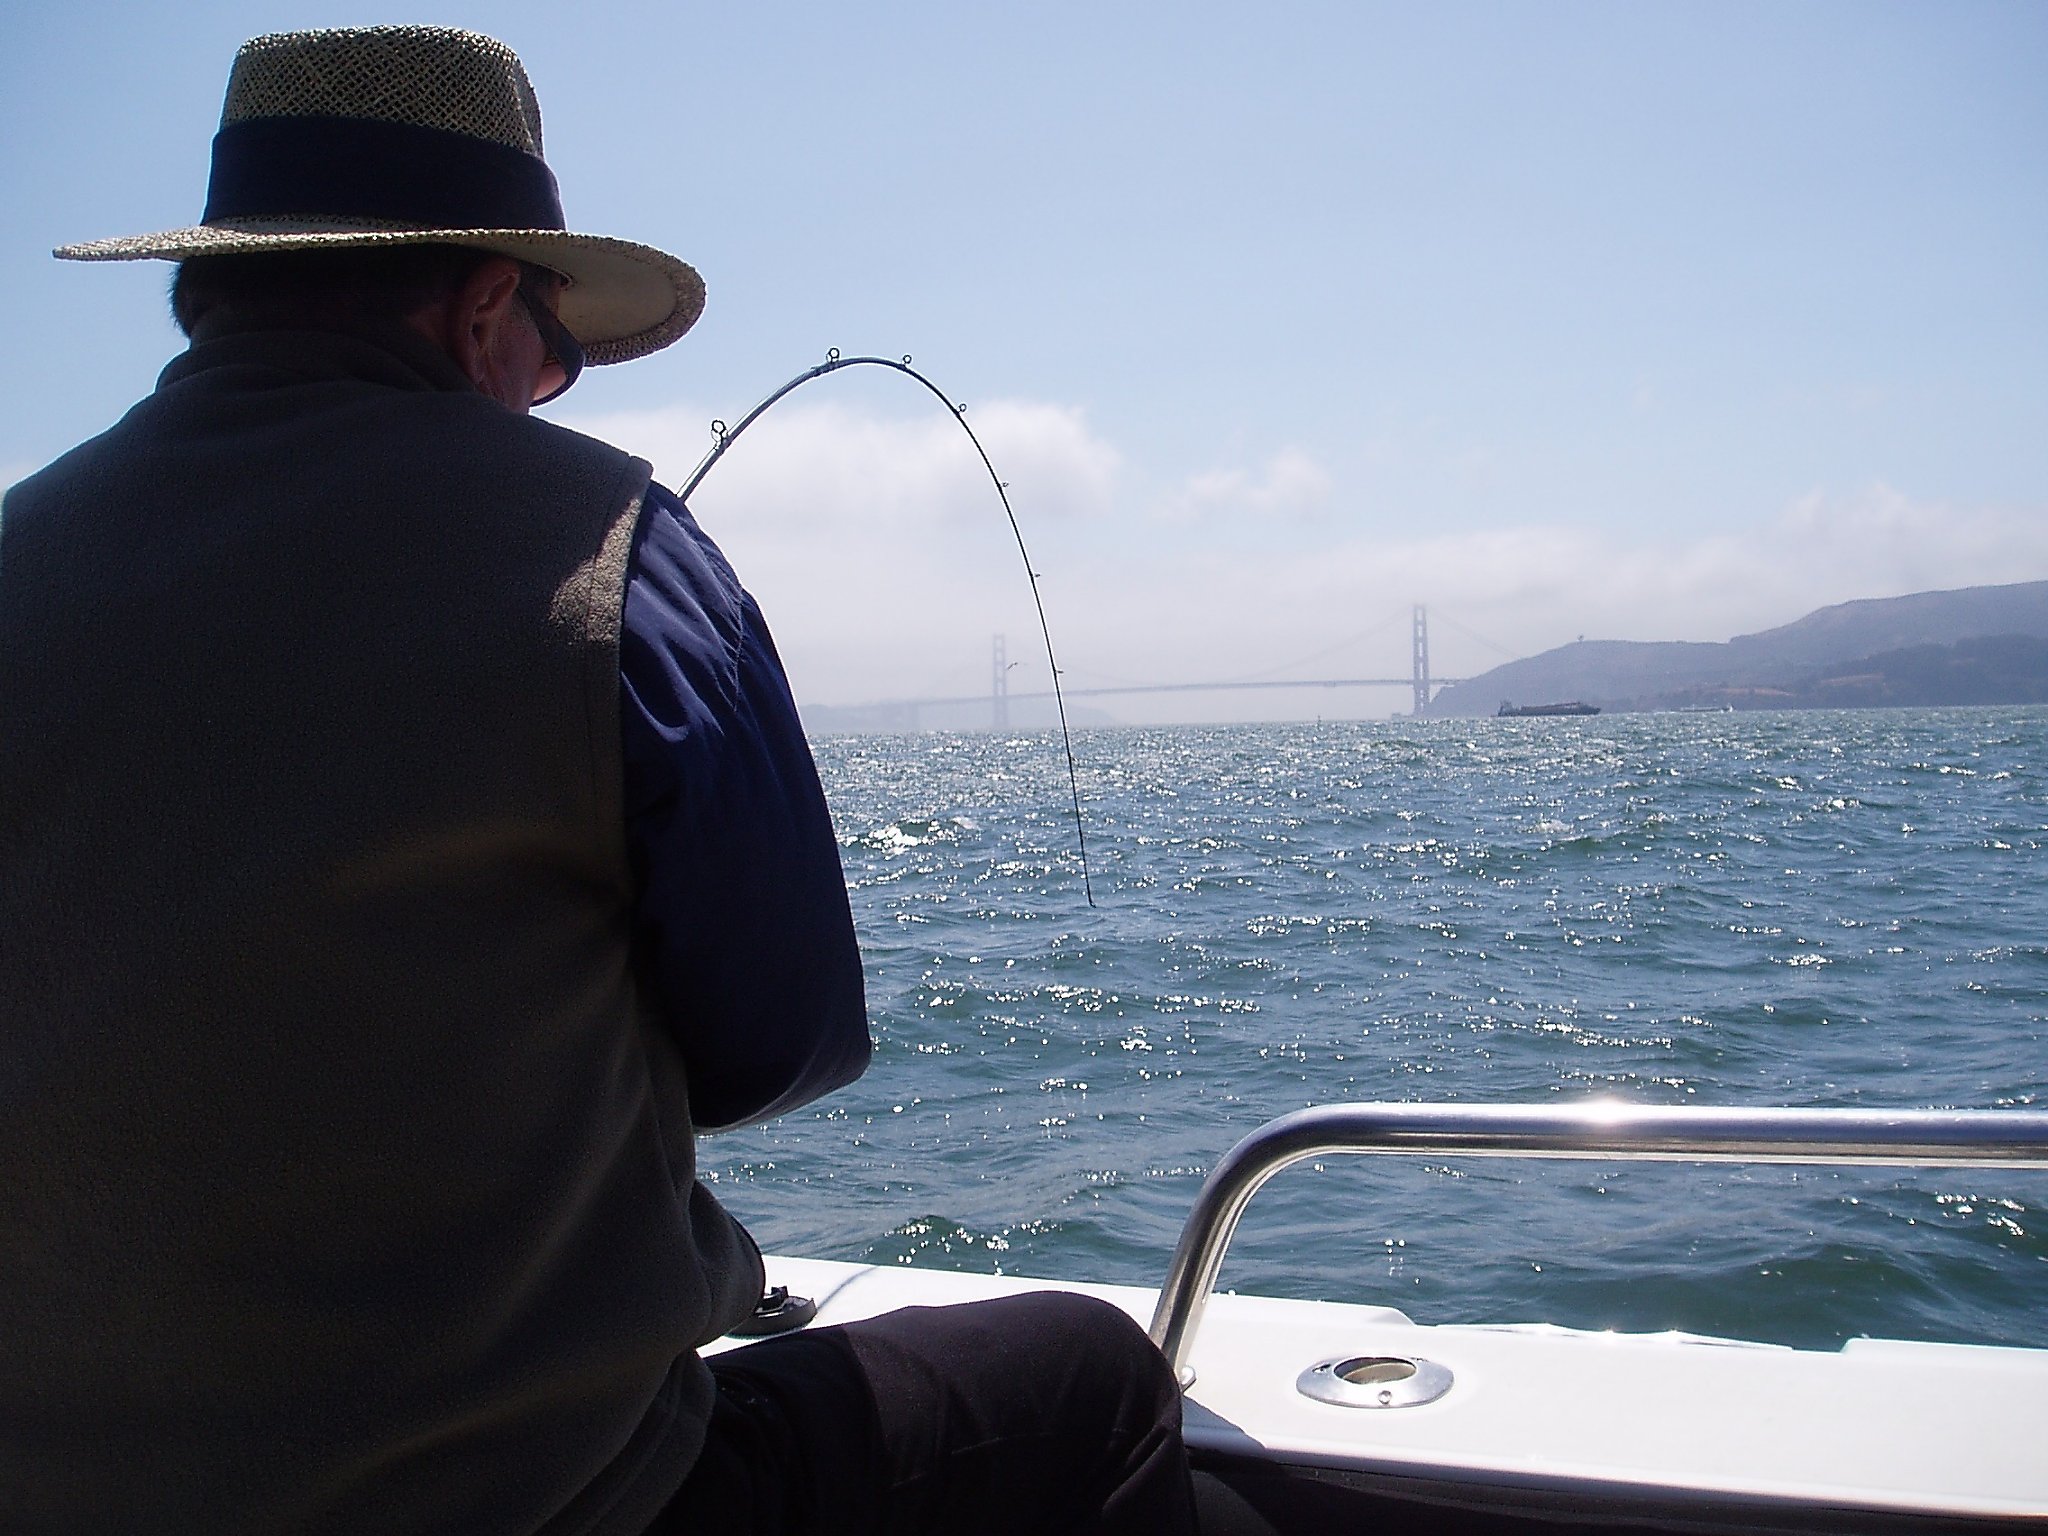 Striped bass fishing in the San Francisco Bay Area. Summer fishing for striped  bass/halibut fishing. 